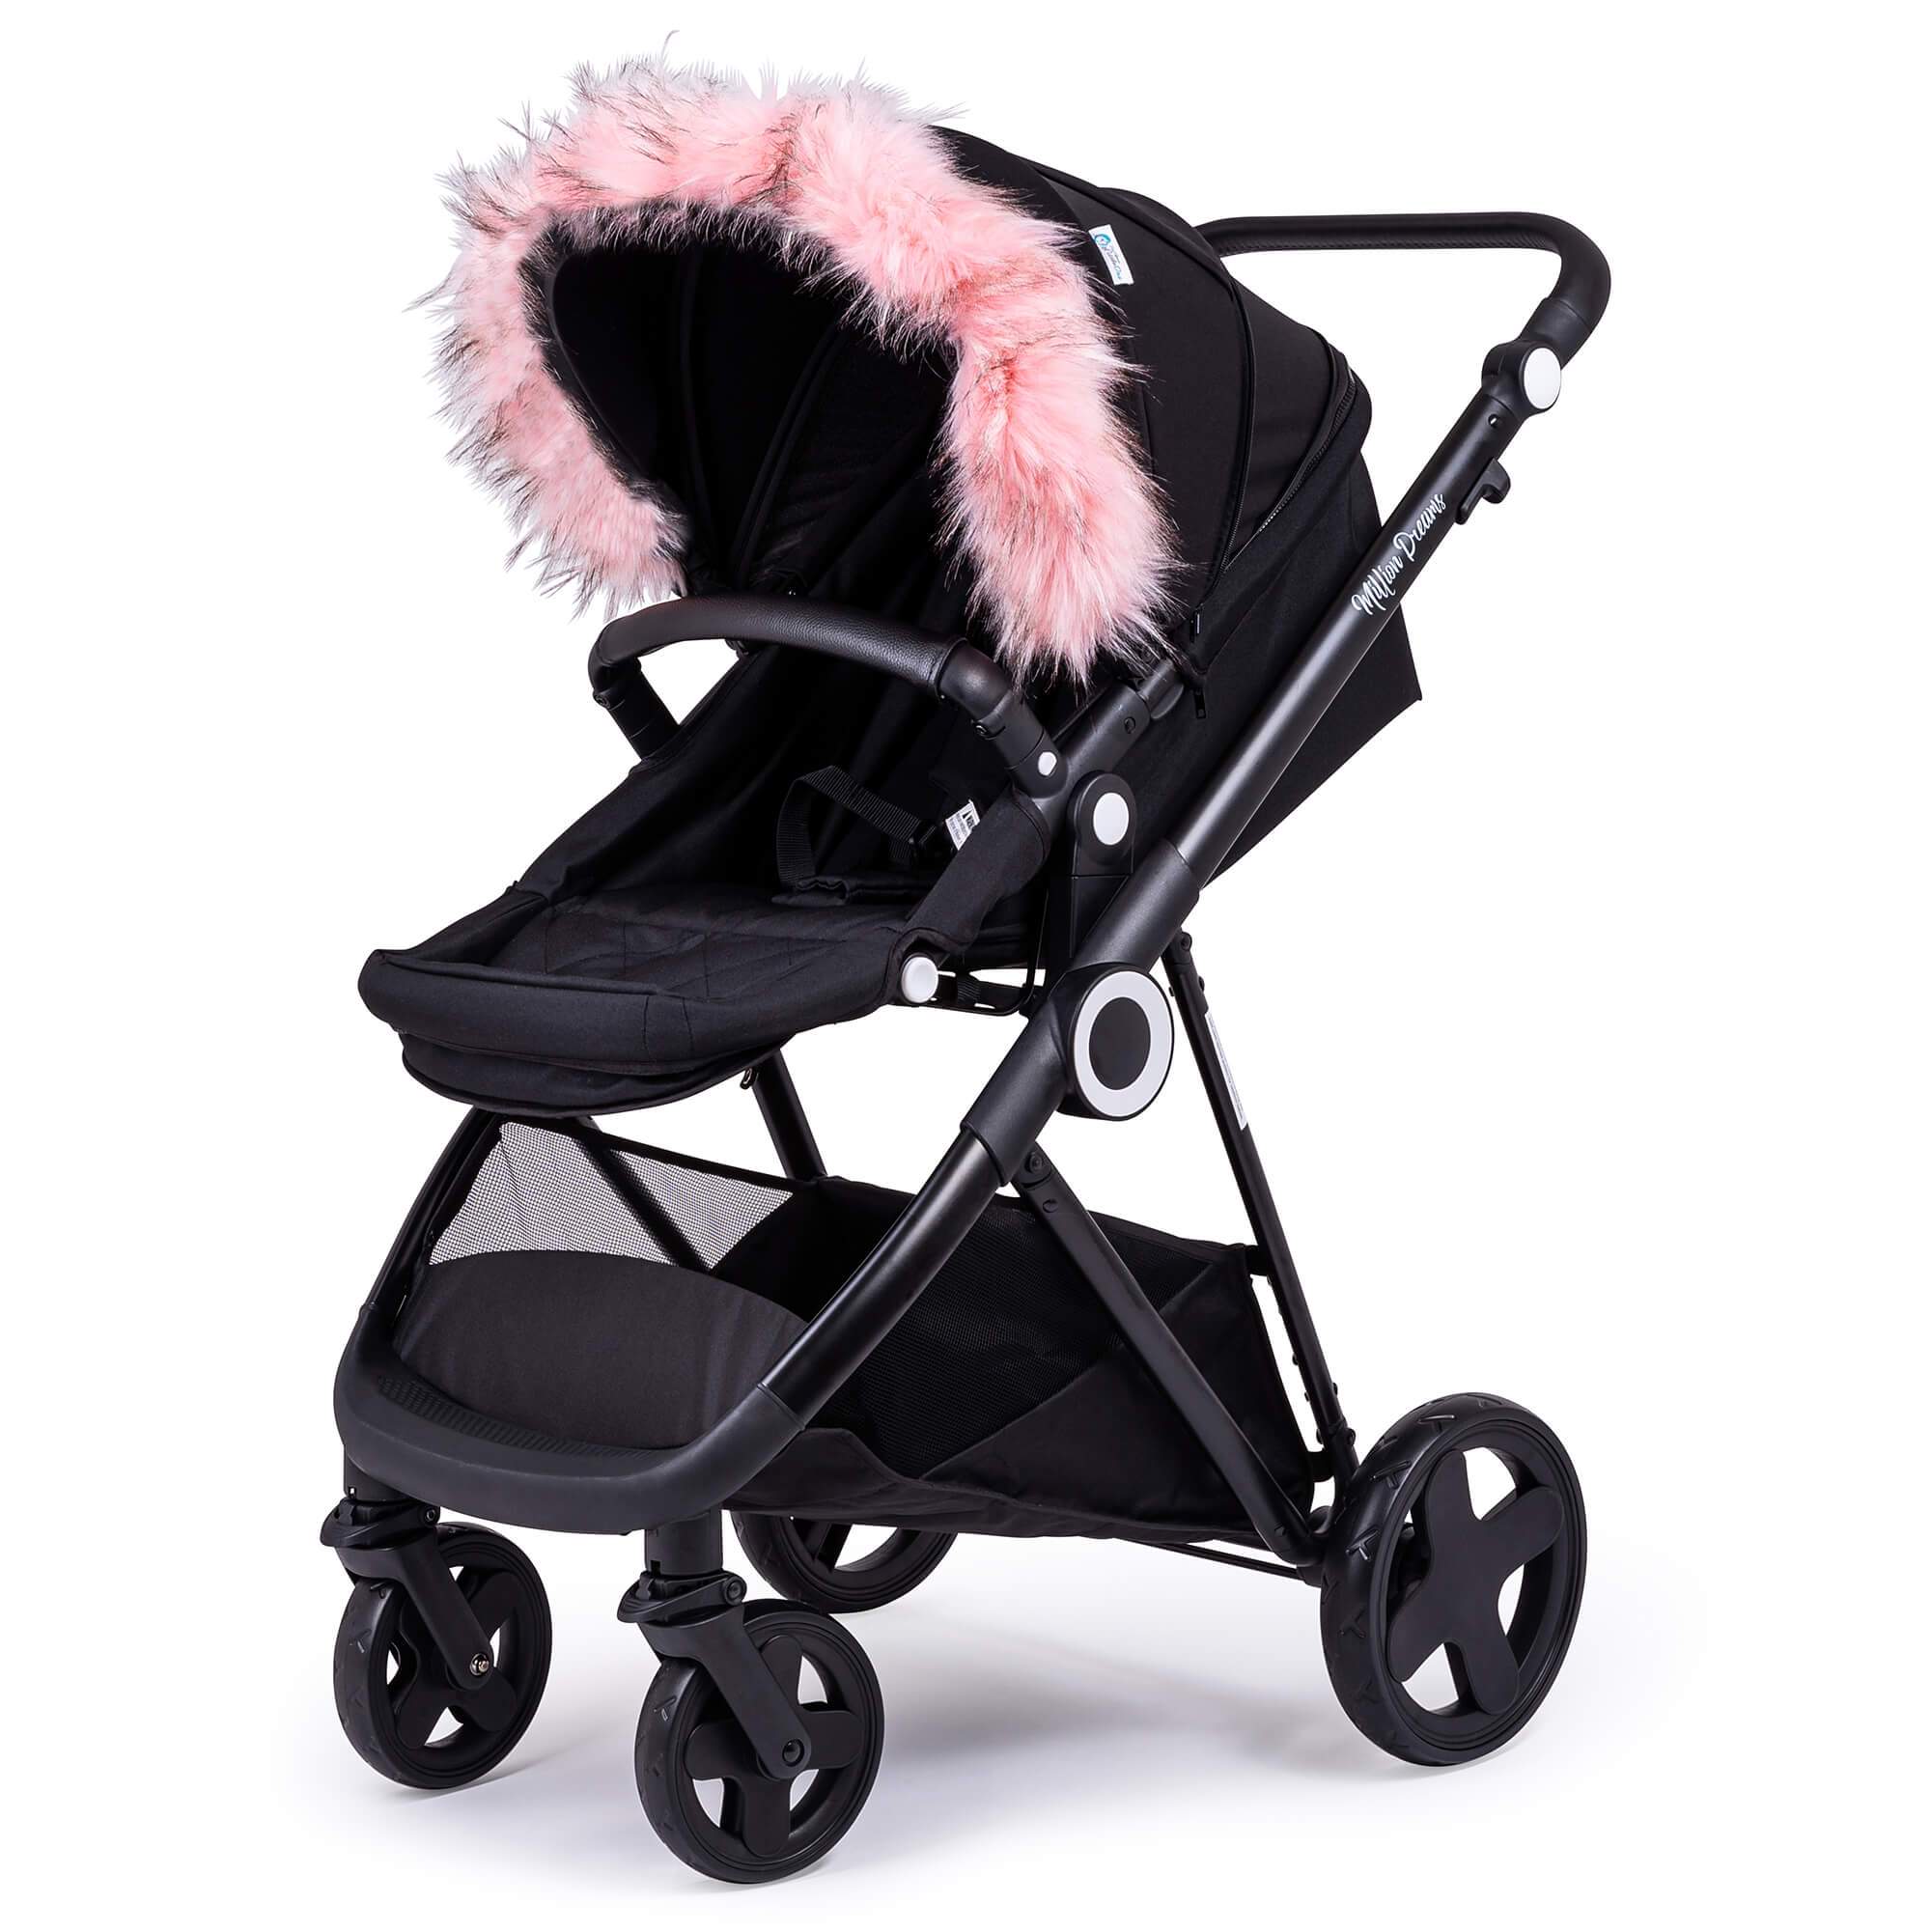 Pram Fur Hood Trim Attachment for Pushchair Compatible with DoBuggy - Light Pink / Fits All Models | For Your Little One